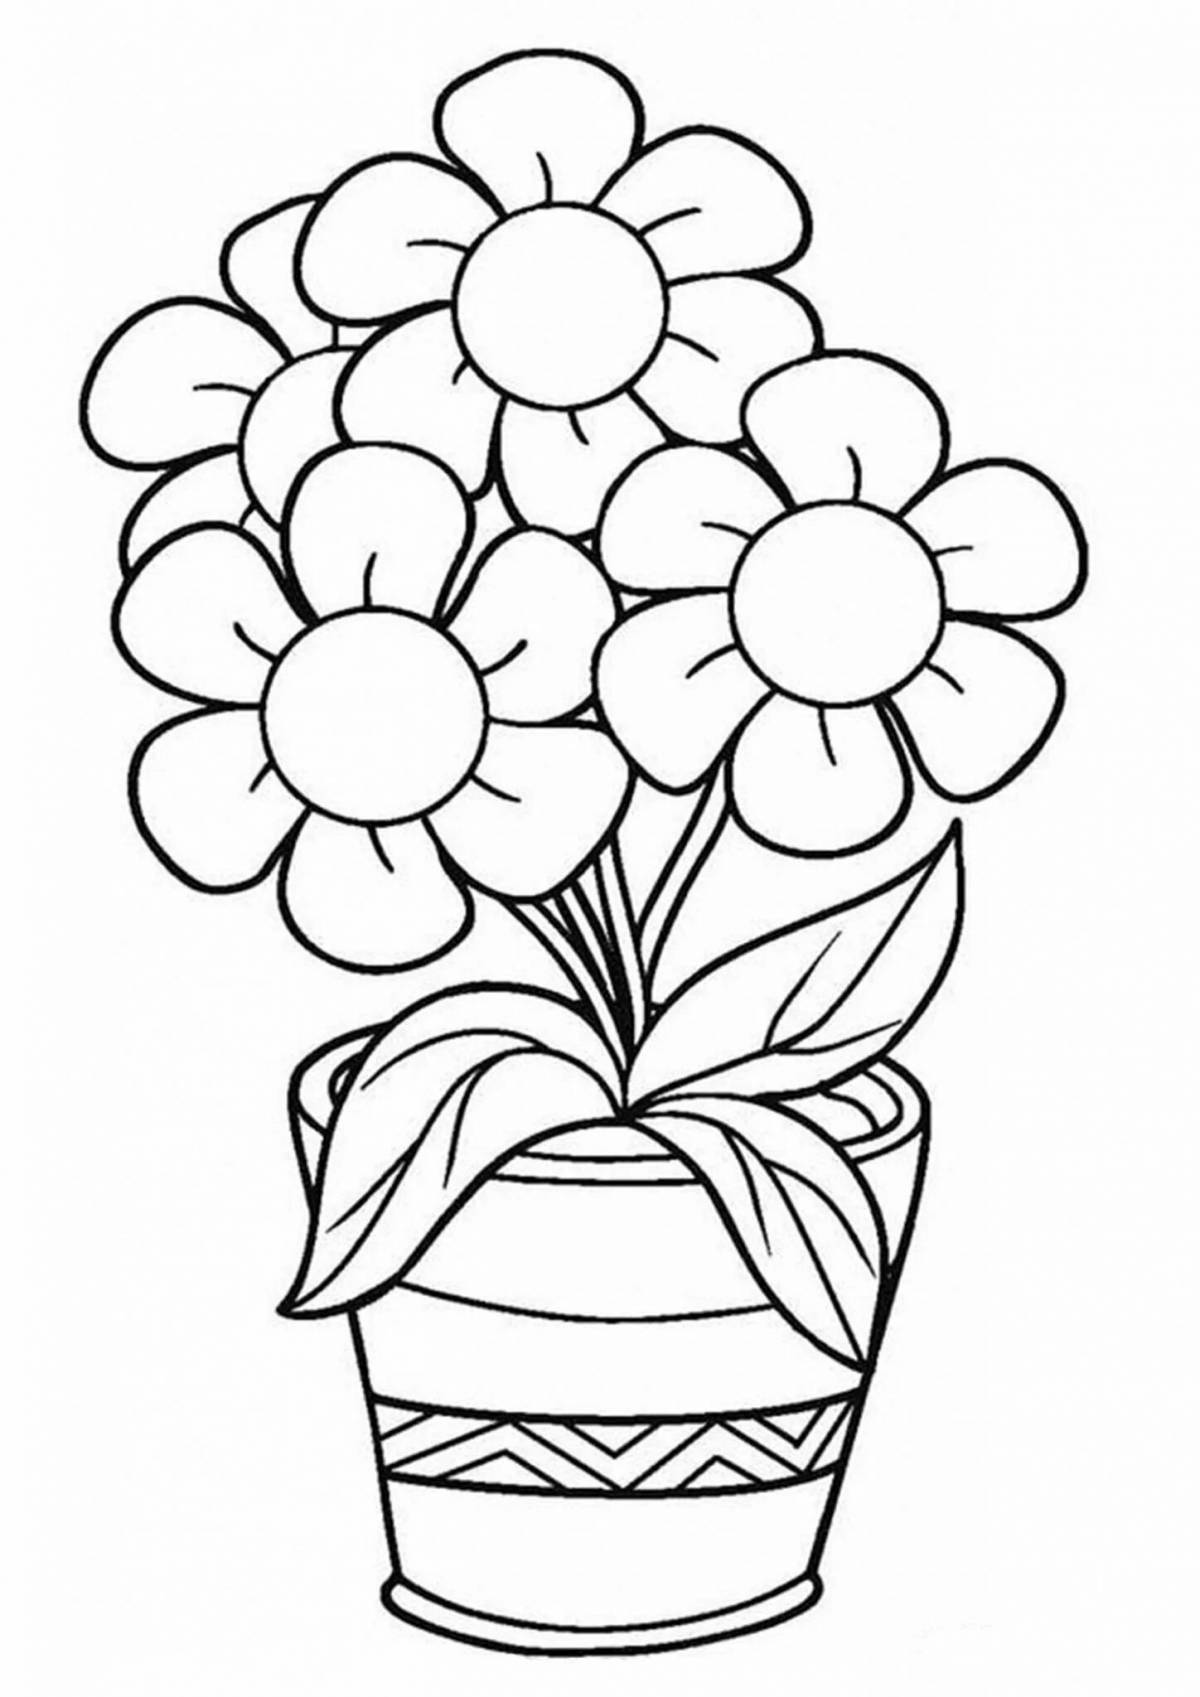 Fun coloring flowers for children 2-3 years old